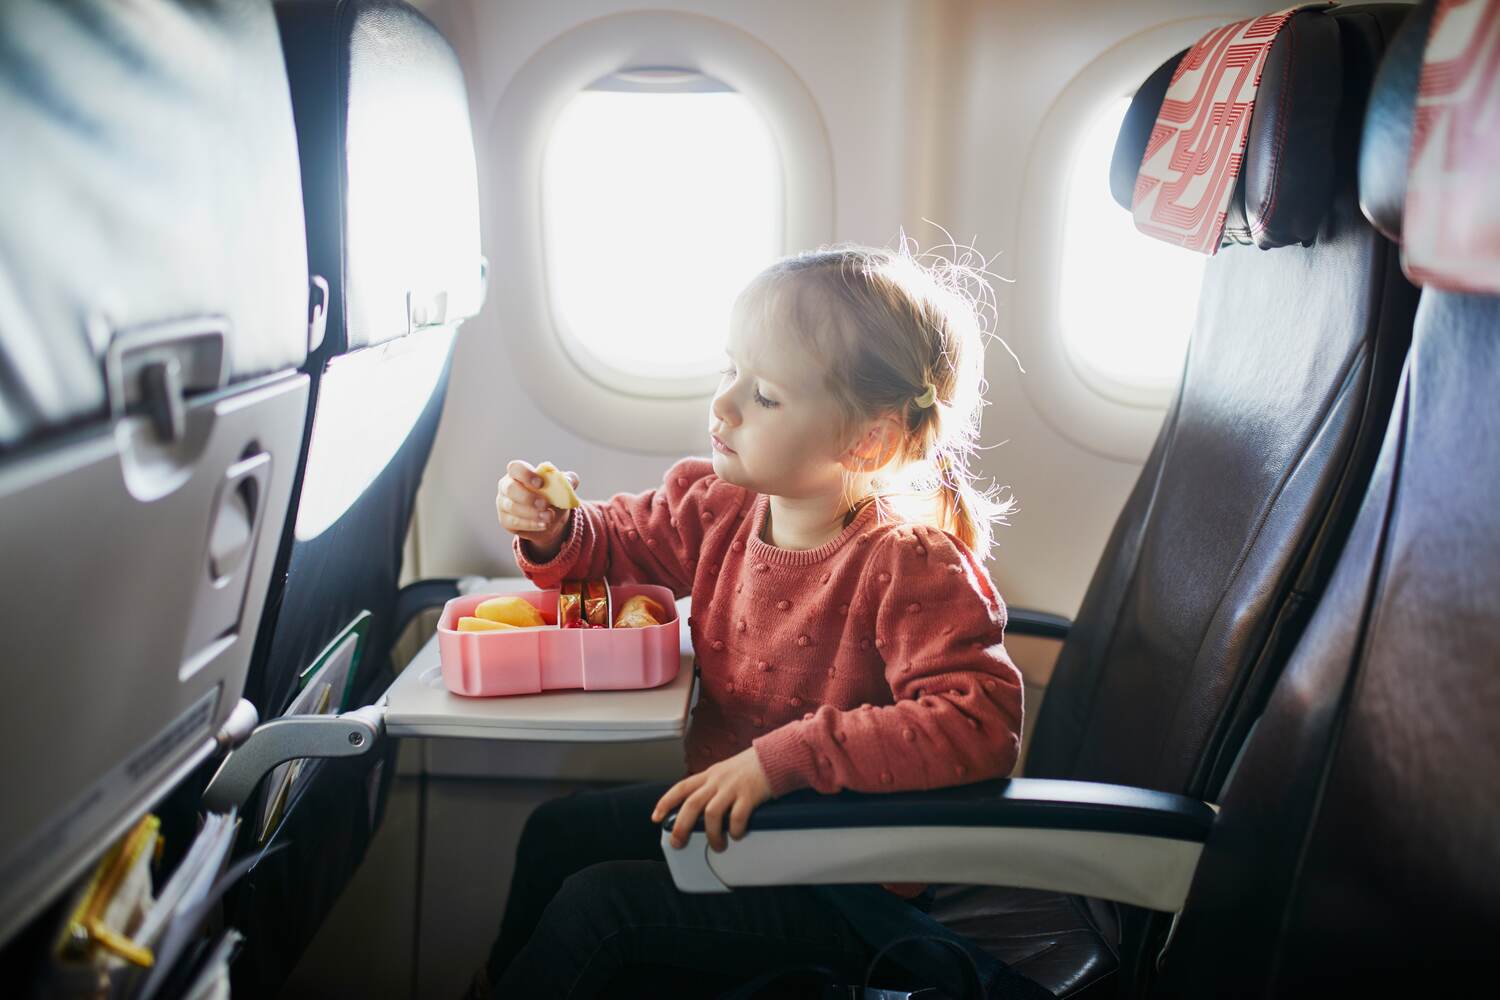 A toddler eating fruits on a flight